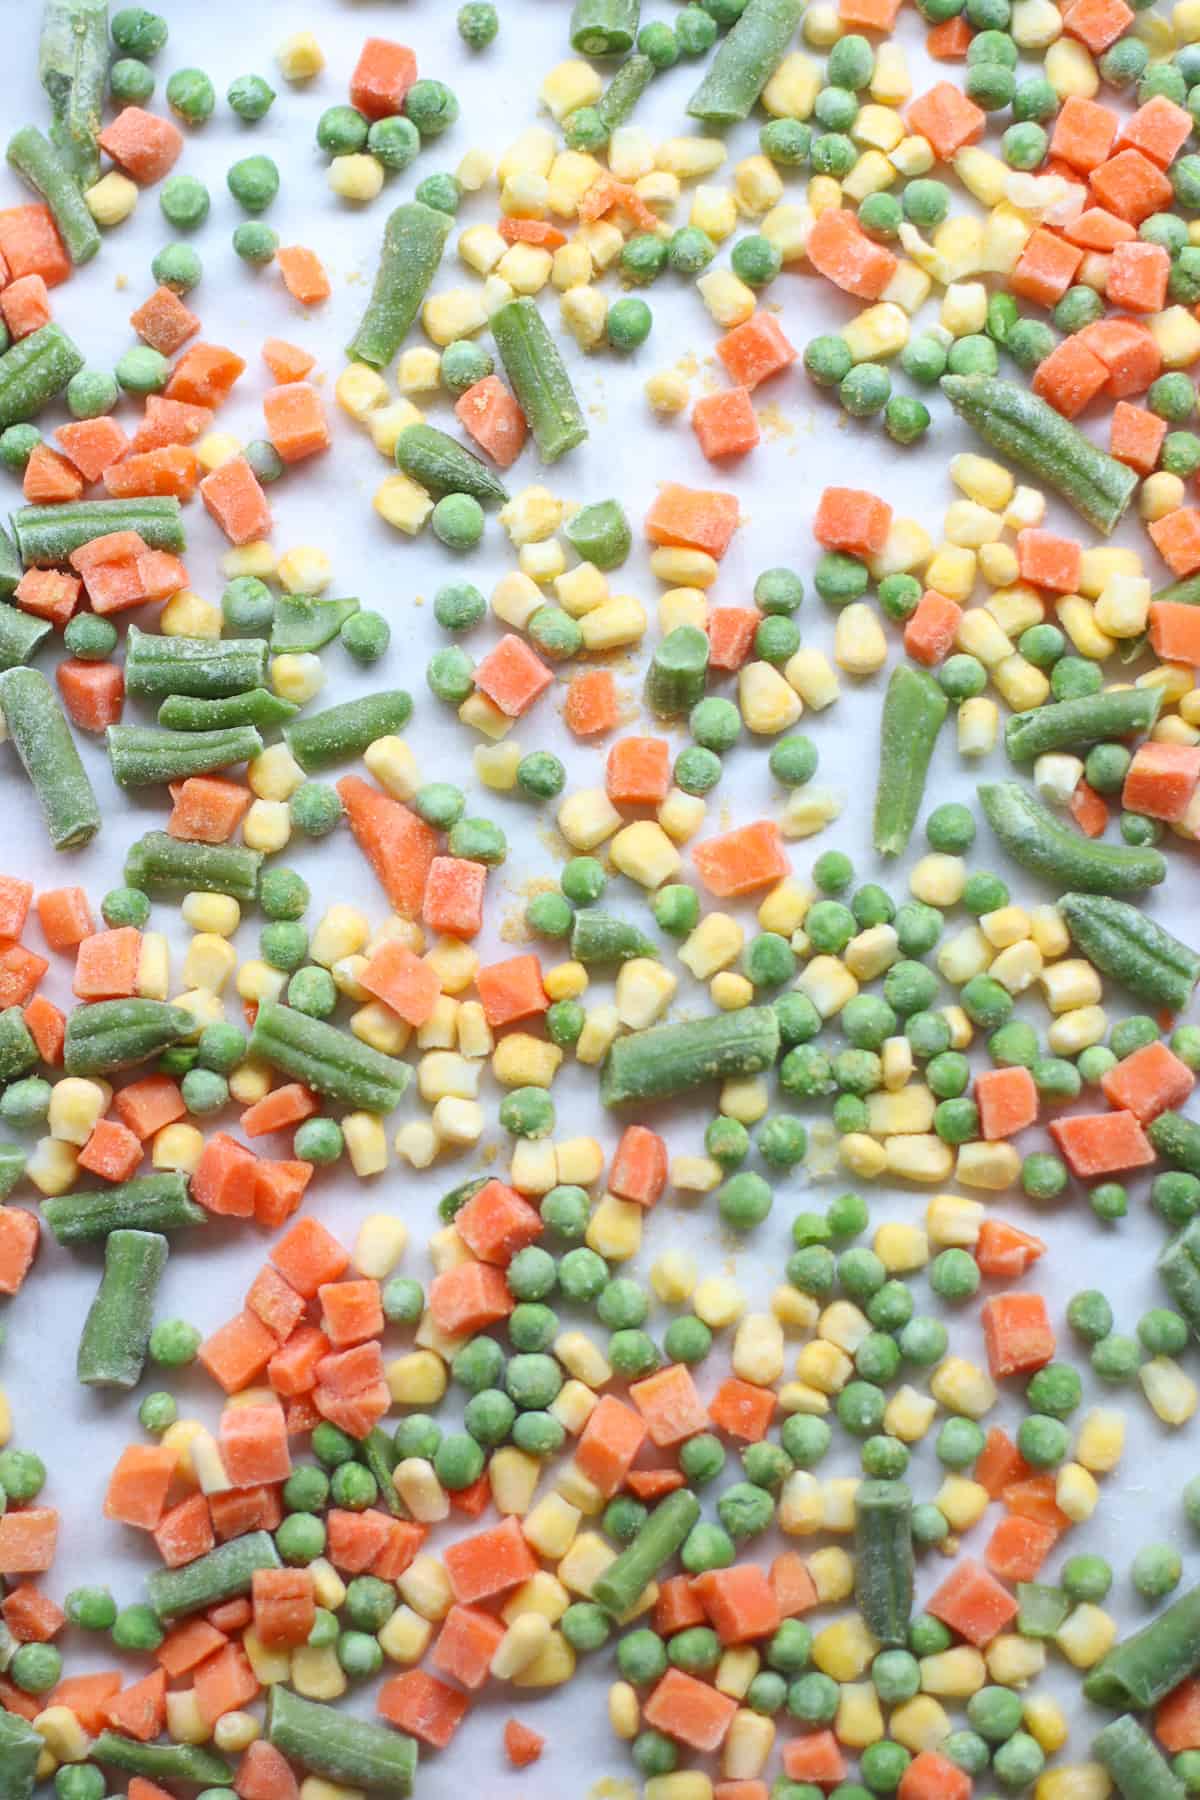 precooked frozen veggies spread out on a baking sheet.